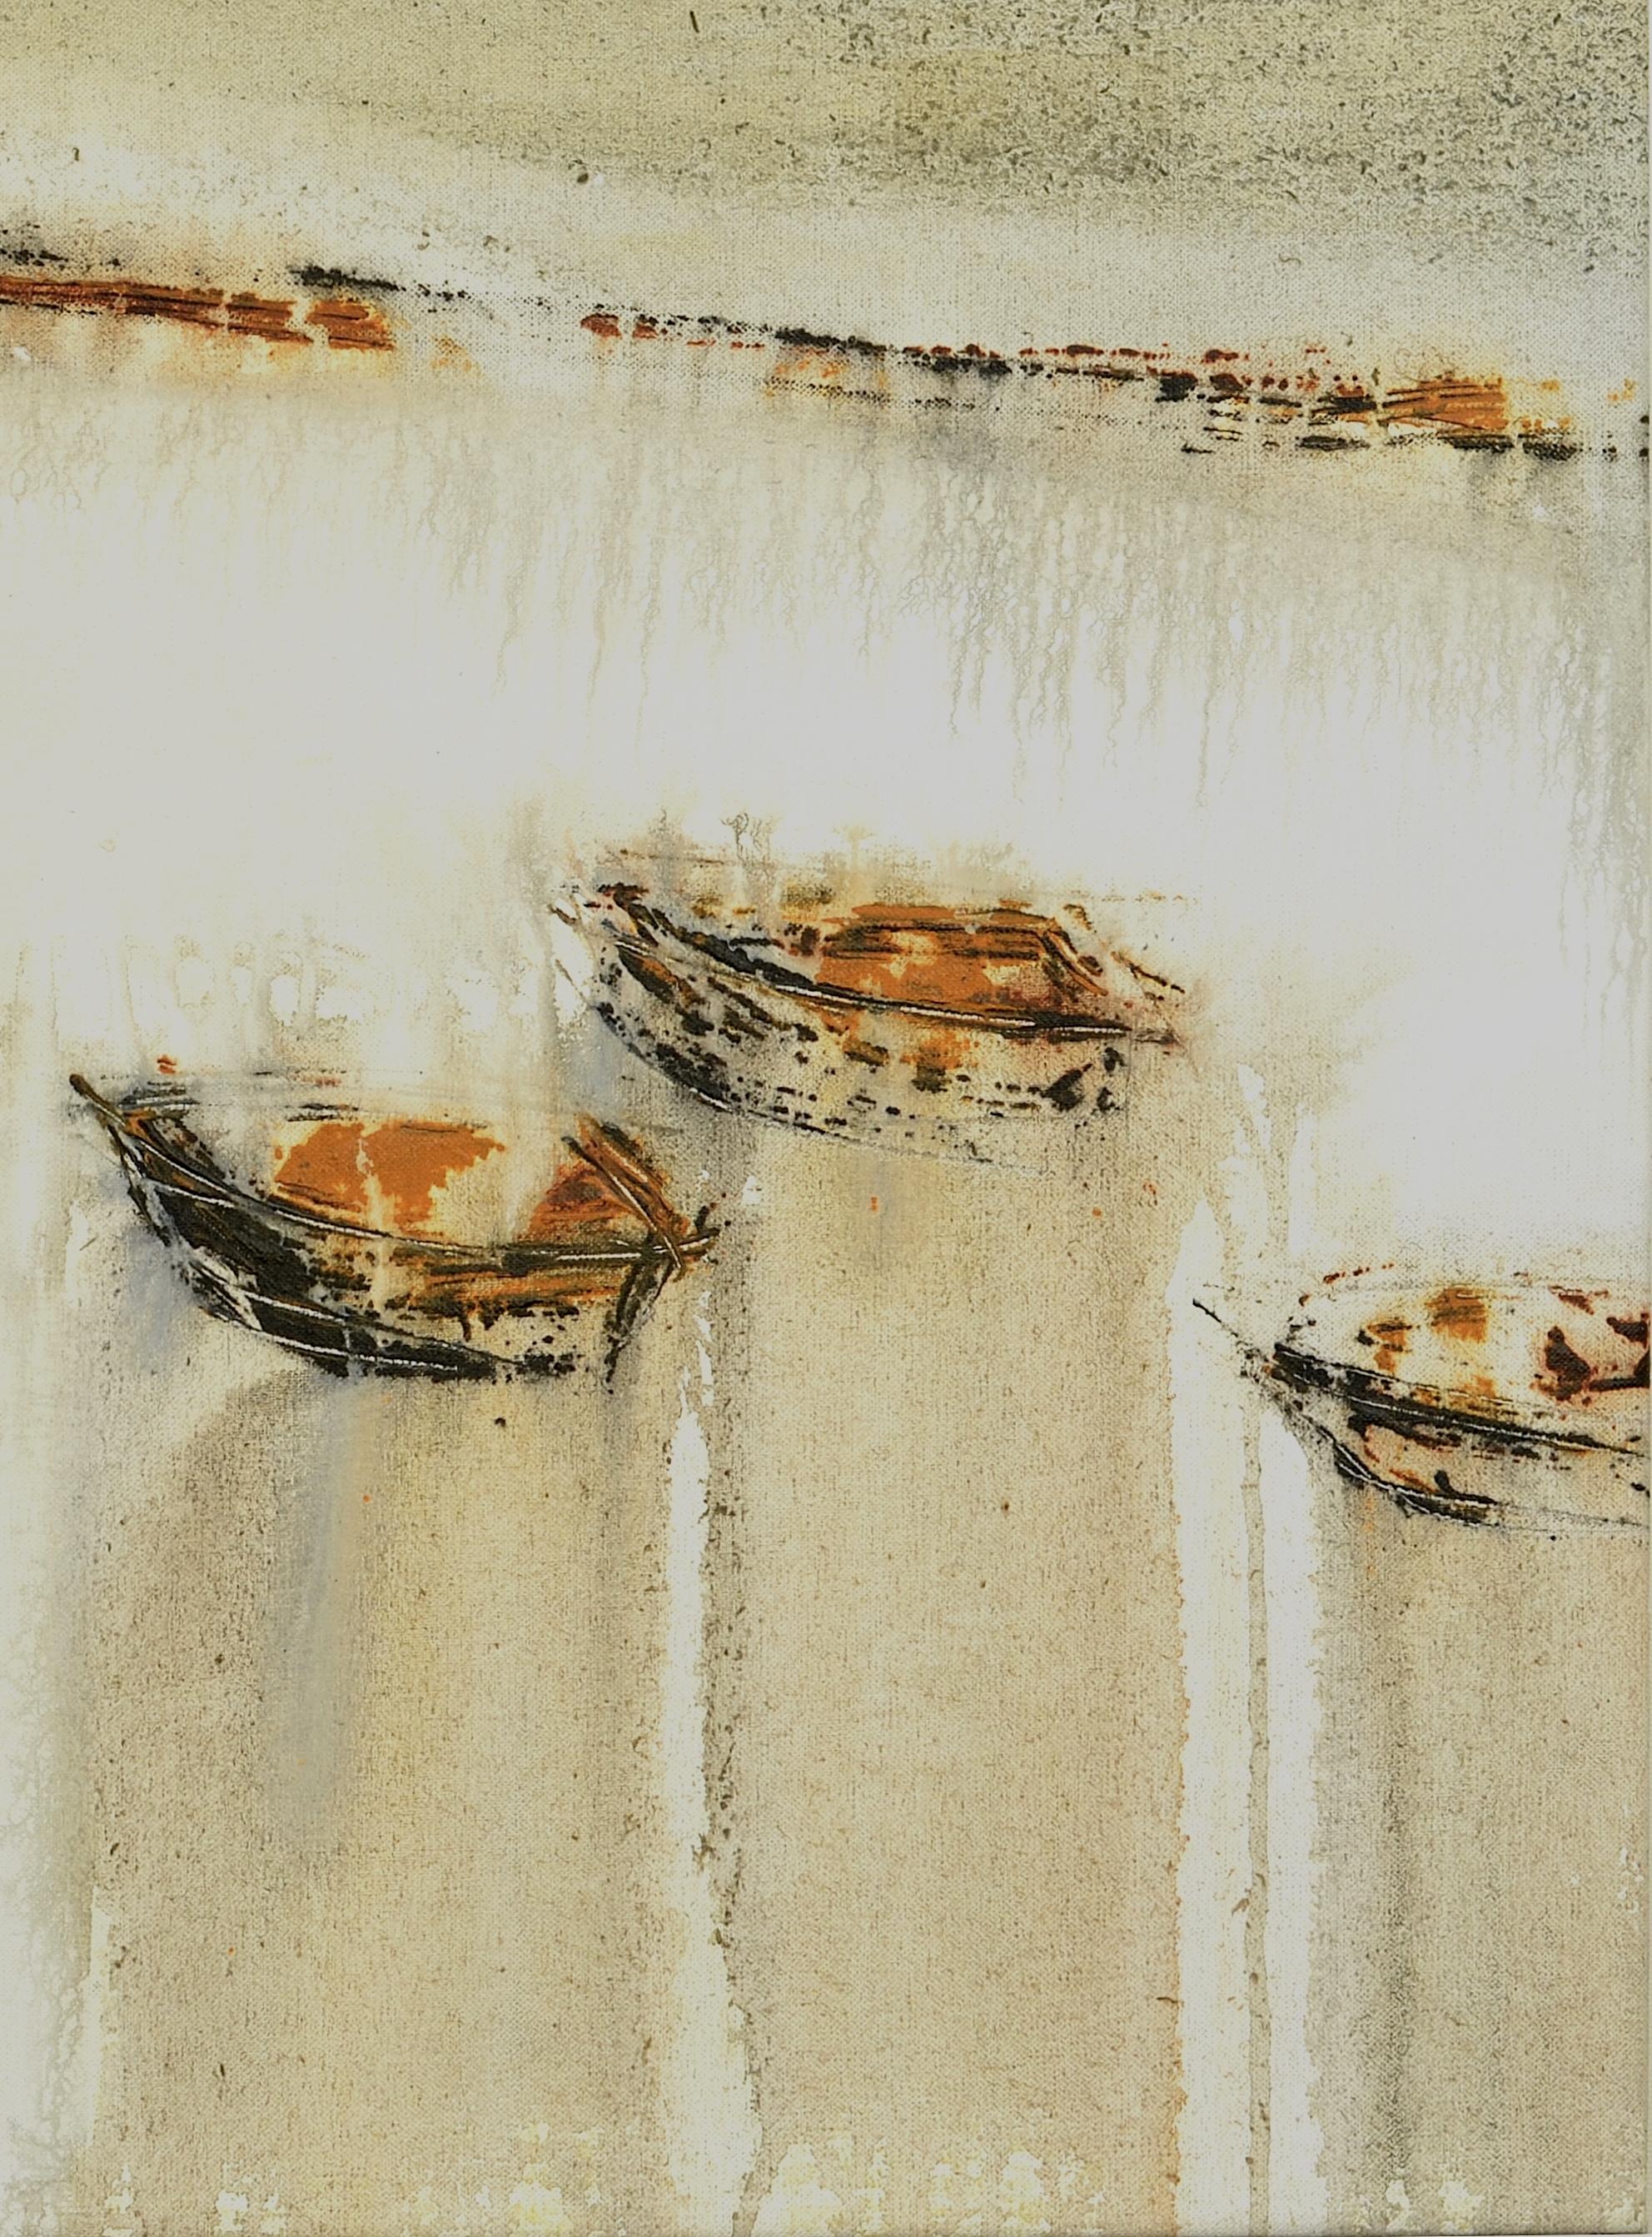 Patterson  Boats on the Shore. acrylic painting - Neo-Expressionist Painting by PATTERSON, Yendris